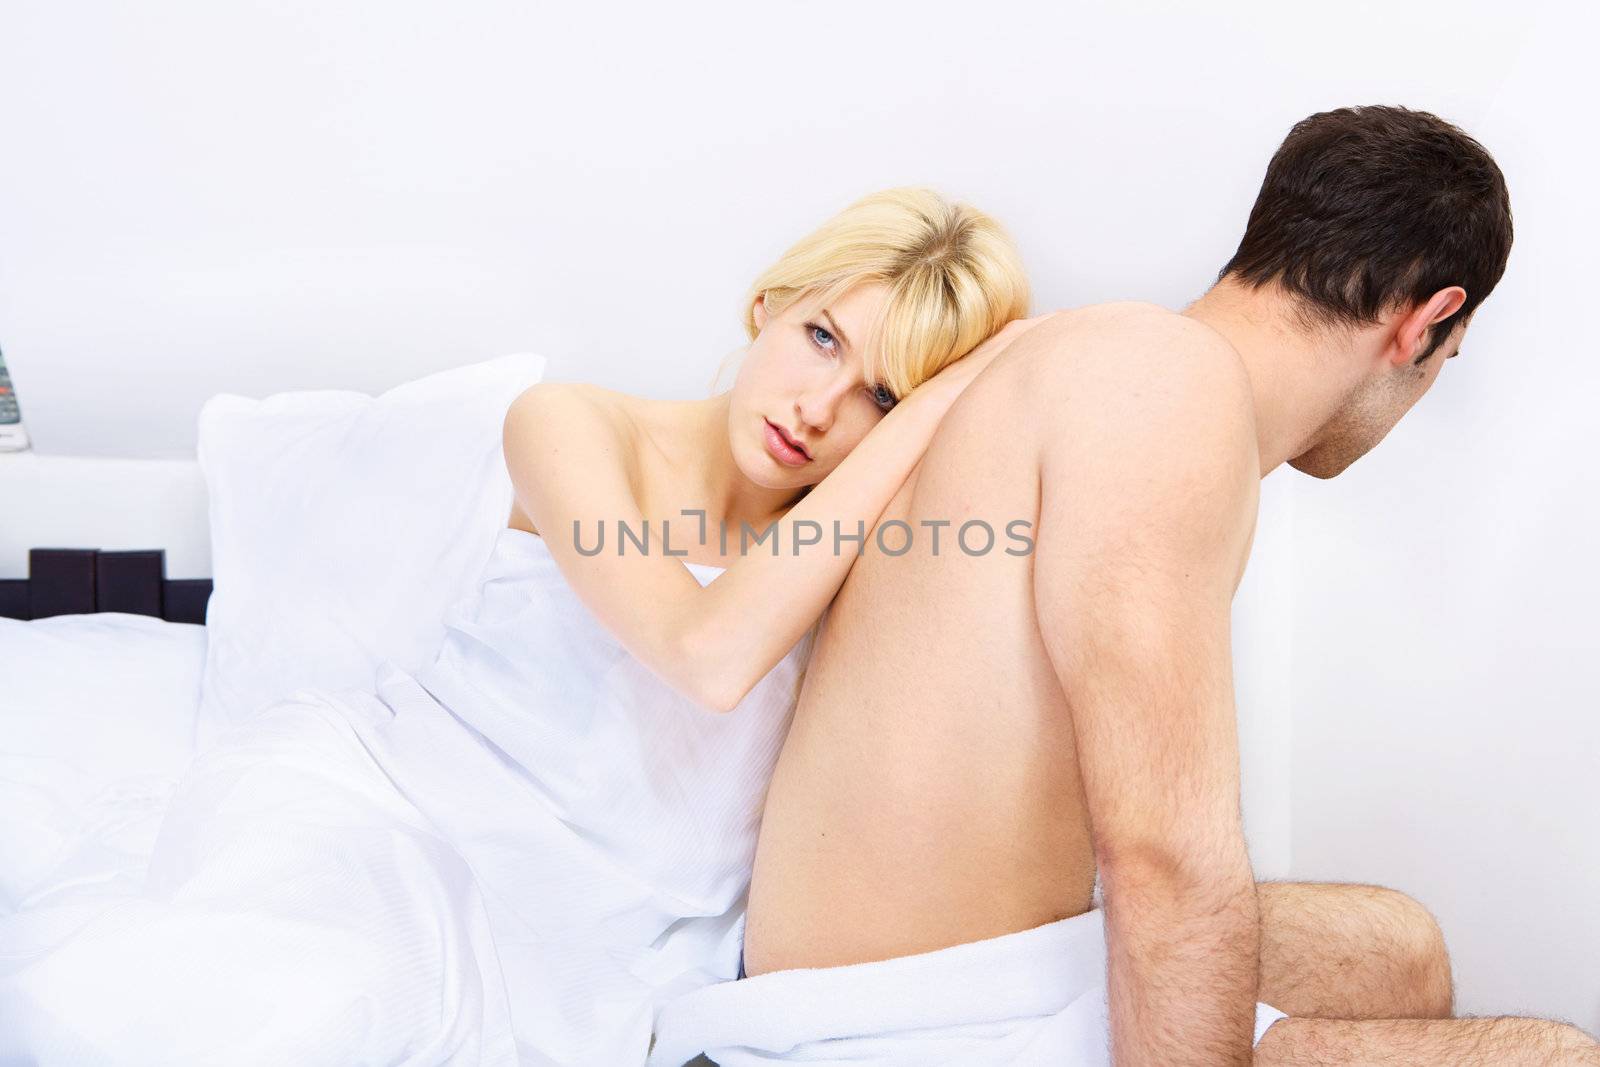 End of a young couple in bedroom, focus on female